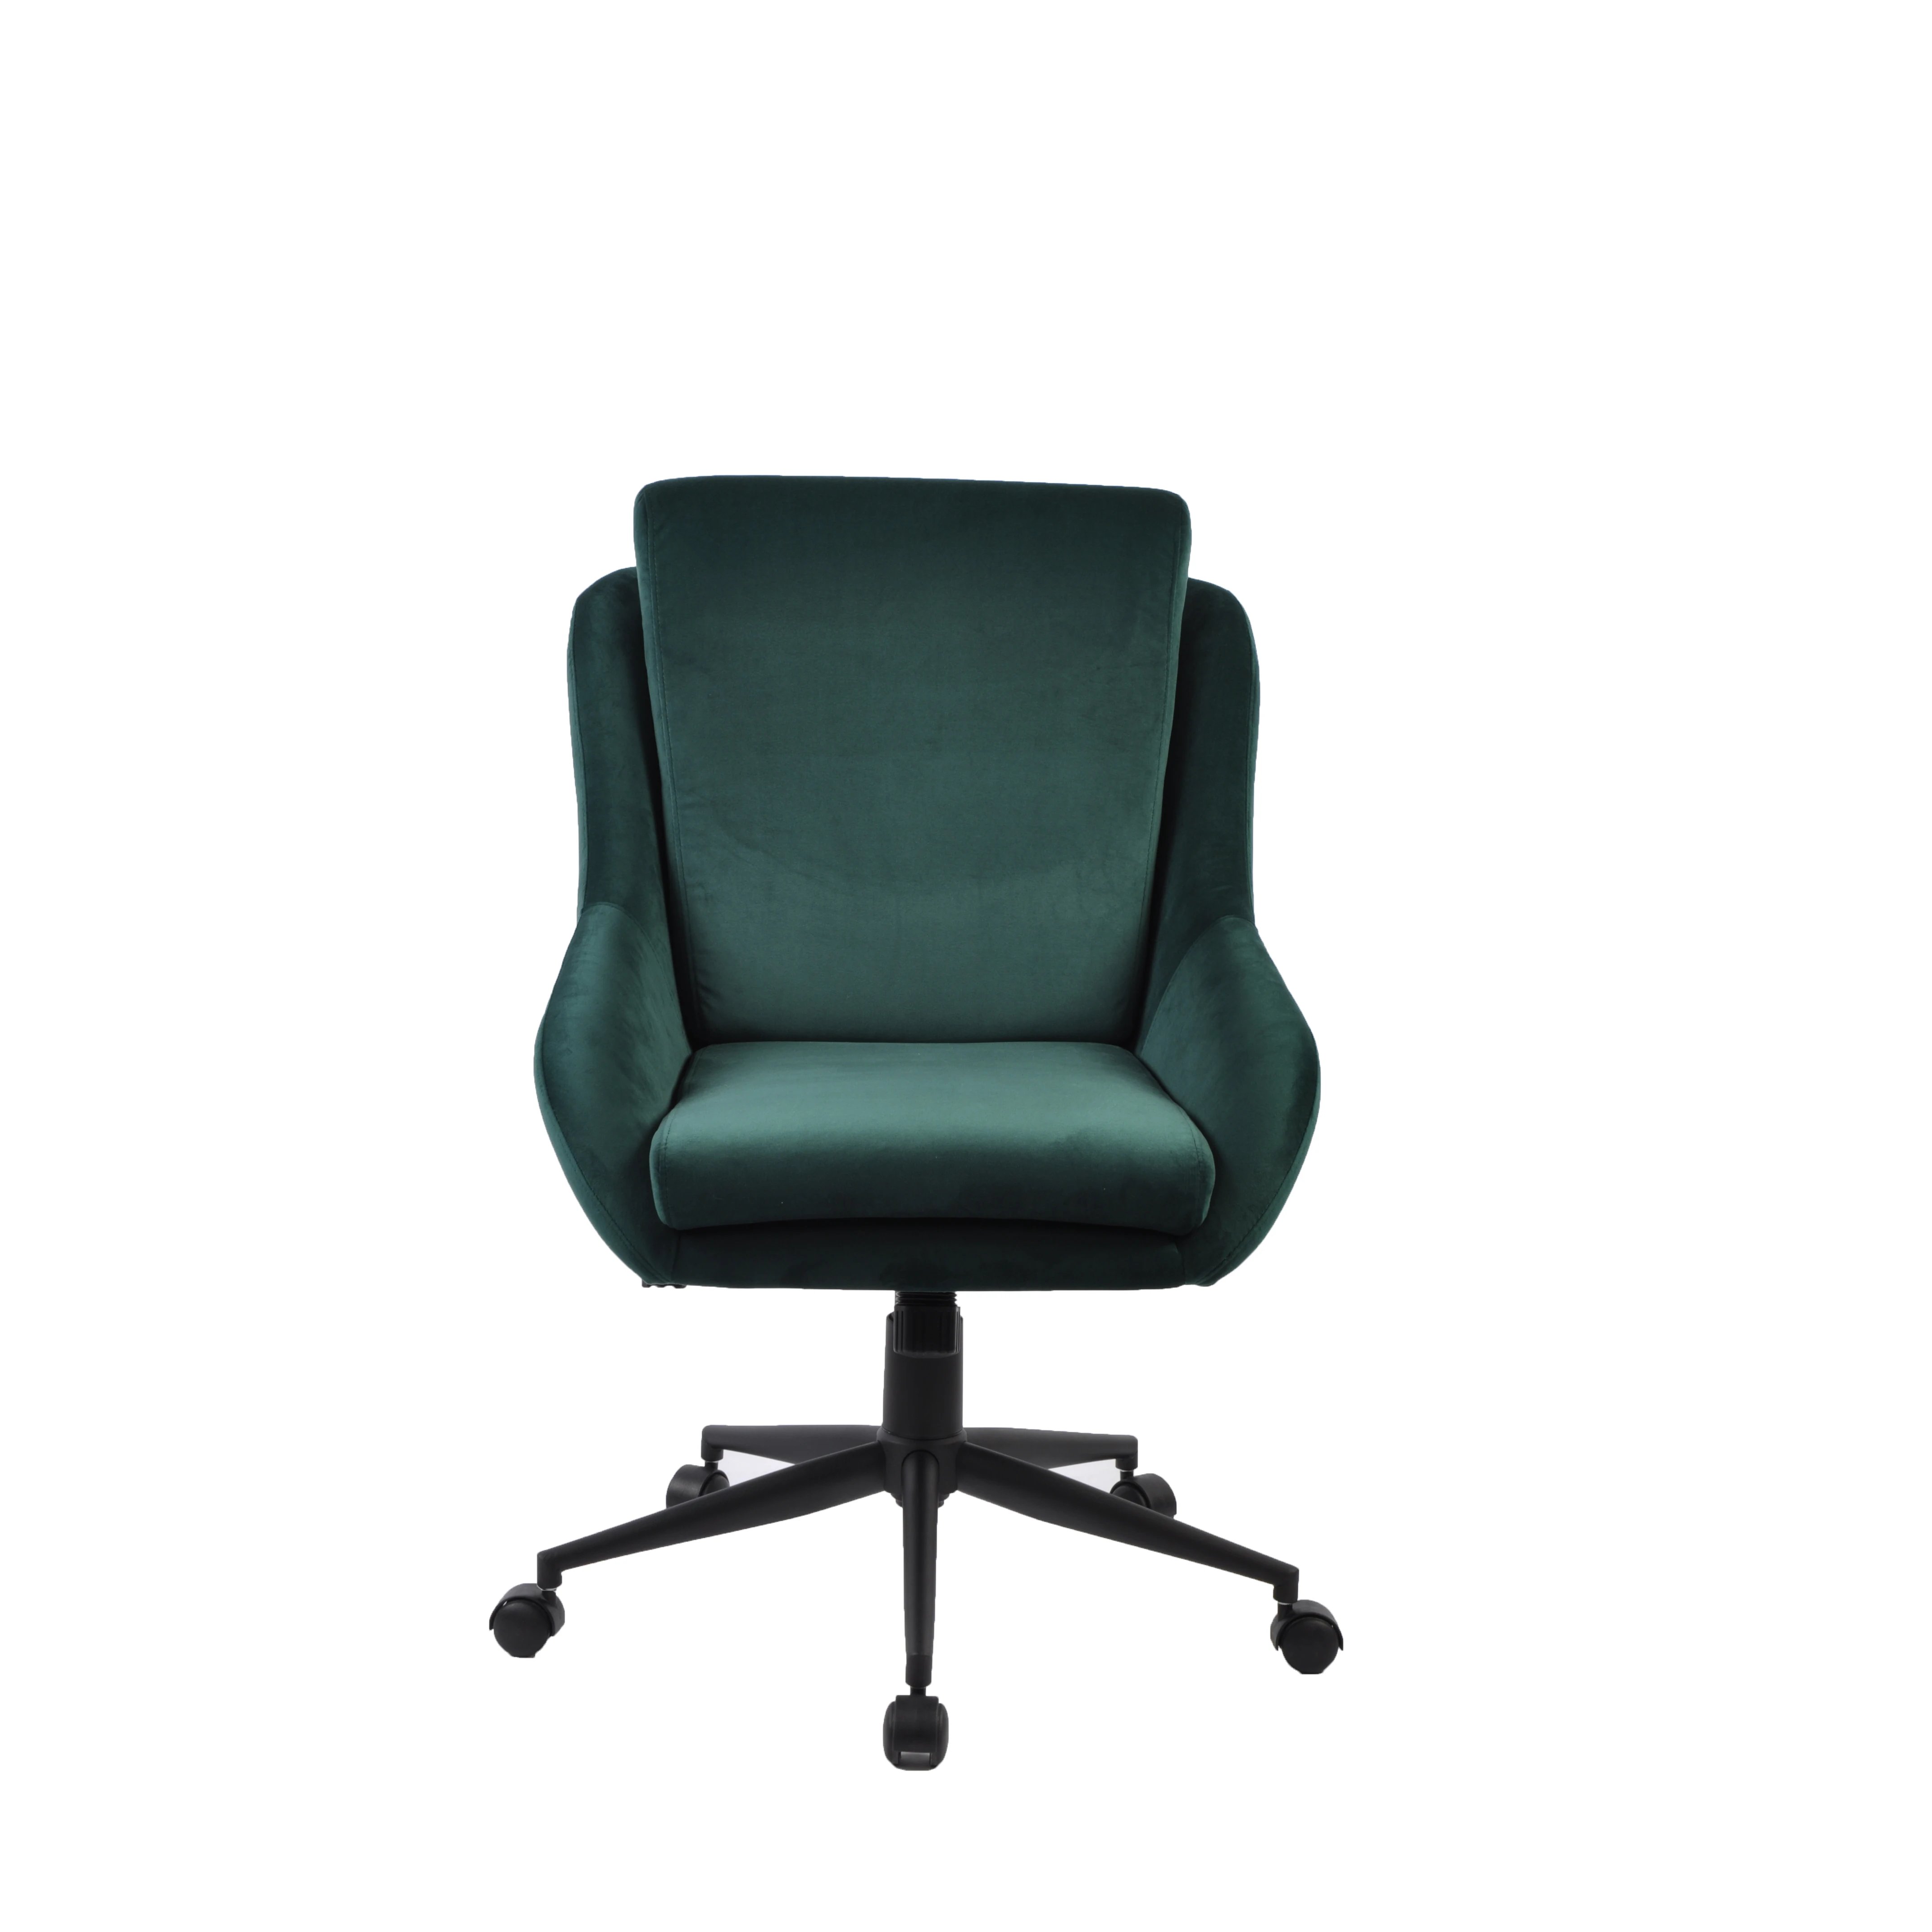 Carlford Hot Sale High Quality Luxury Modern Green Velvet Cover Office Chair Home Office Chair Buy Office Chair Velvet Chair With Wheels Home Office Chair Product On Alibaba Com